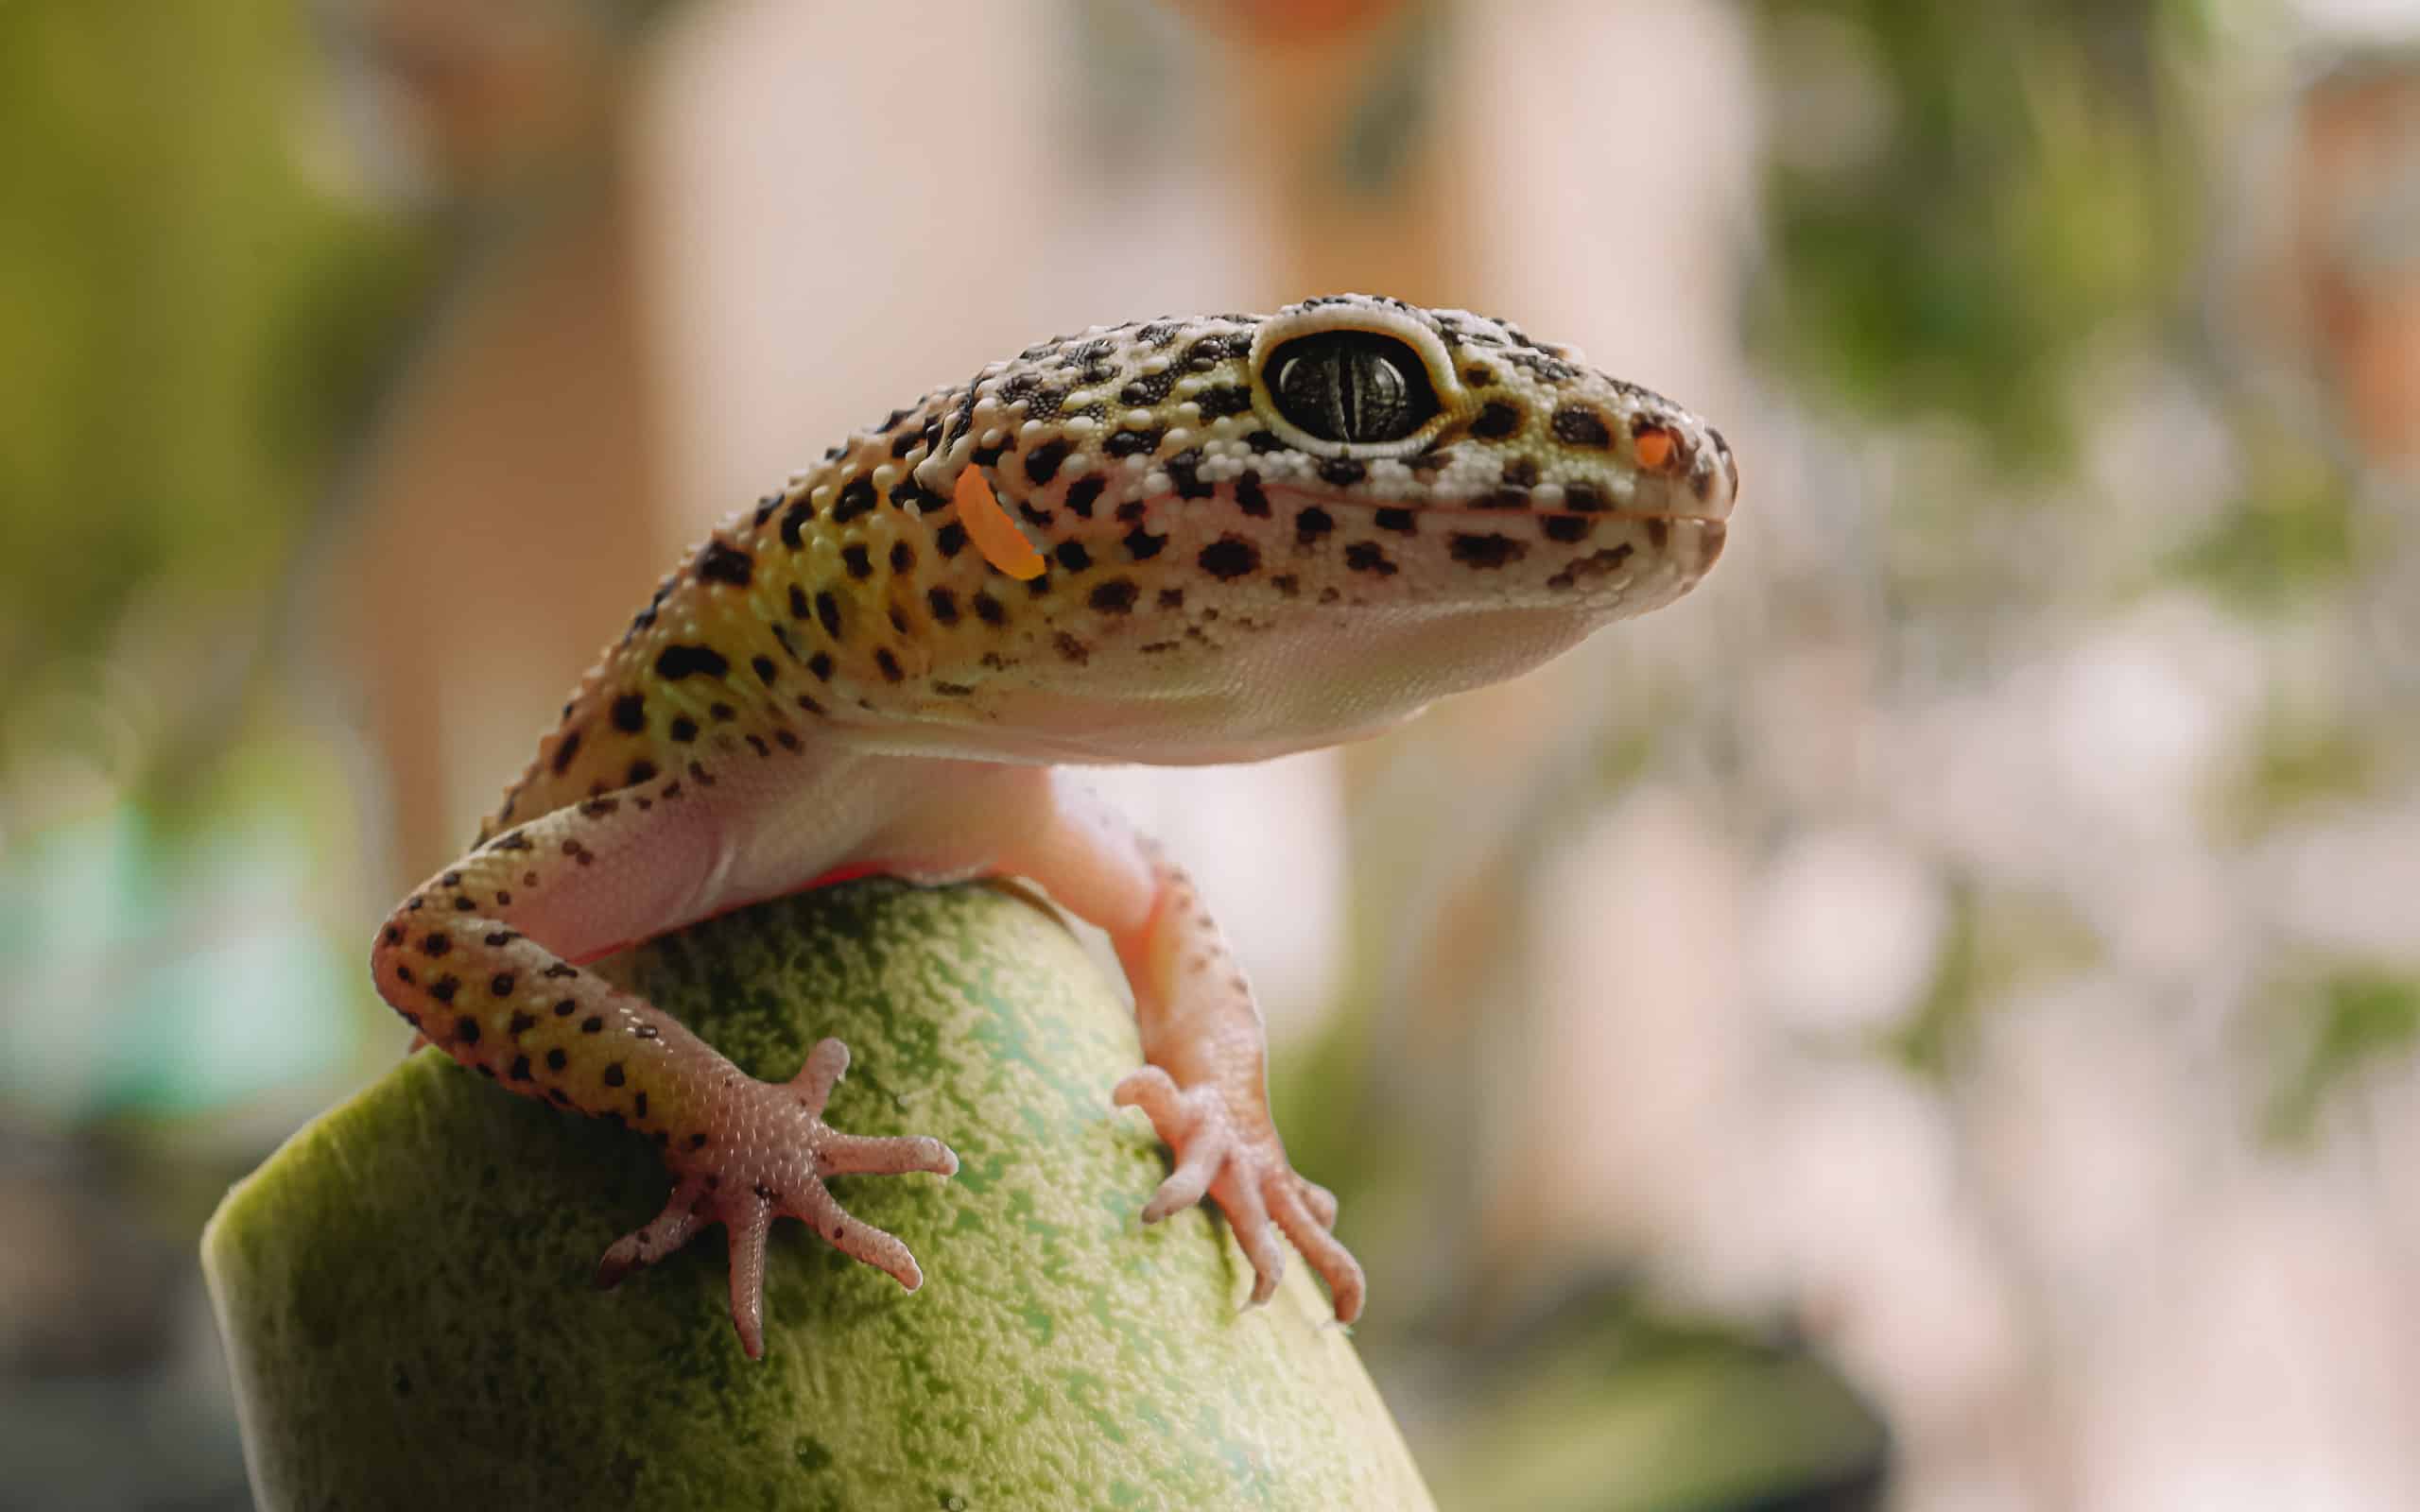 Leopard gecko (Eublepharis macularius) is a cathemeral, ground-dwelling lizard naturally found in the highlands of Asia and throughout Afghanistan, to parts of northern India, often kept as a pet reptile.